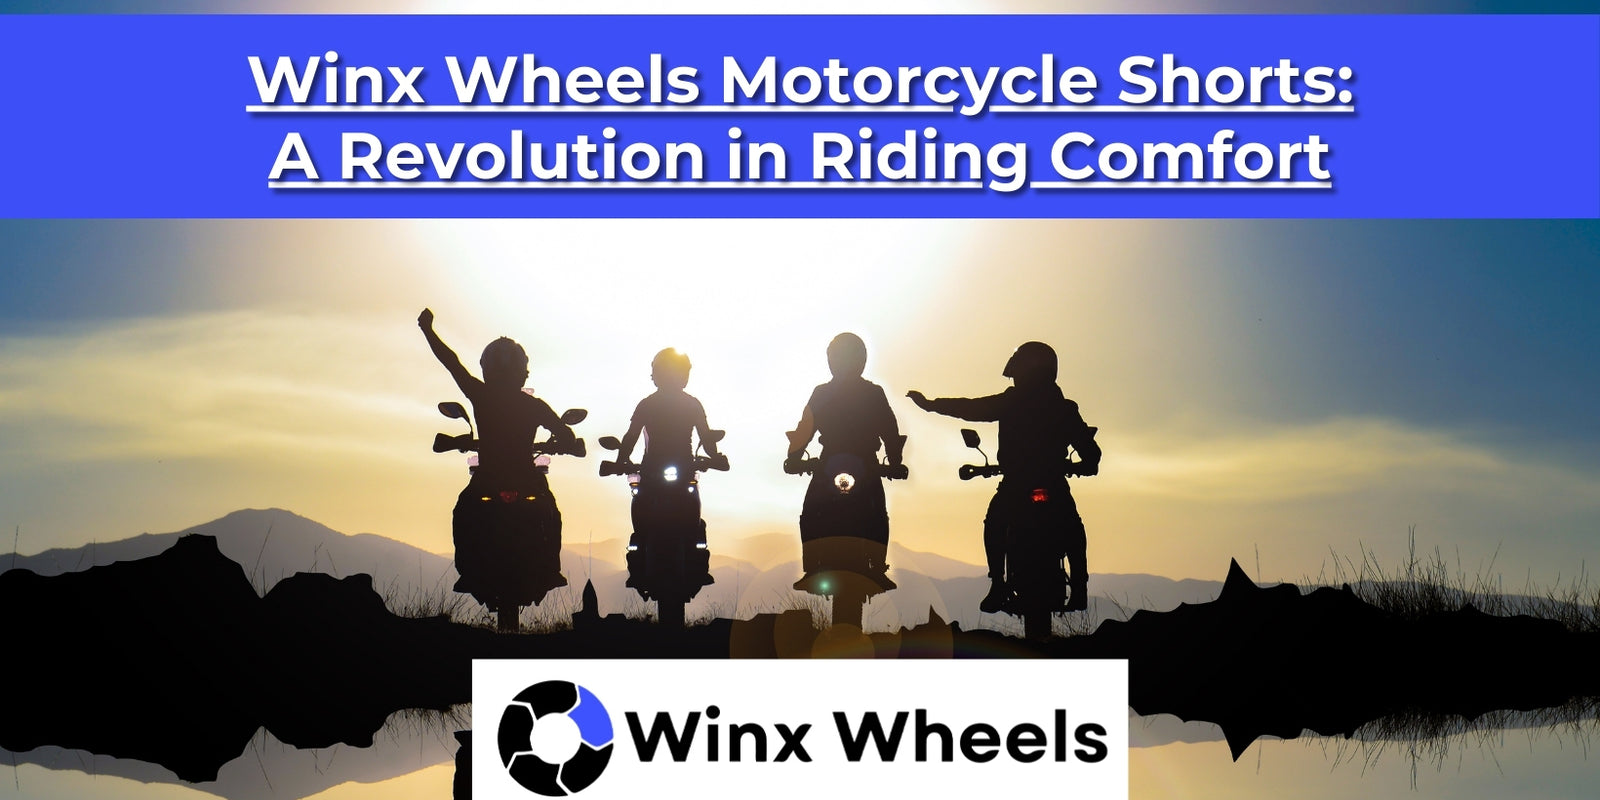 Winx Wheels Motorcycle Shorts: A Revolution in Riding Comfort